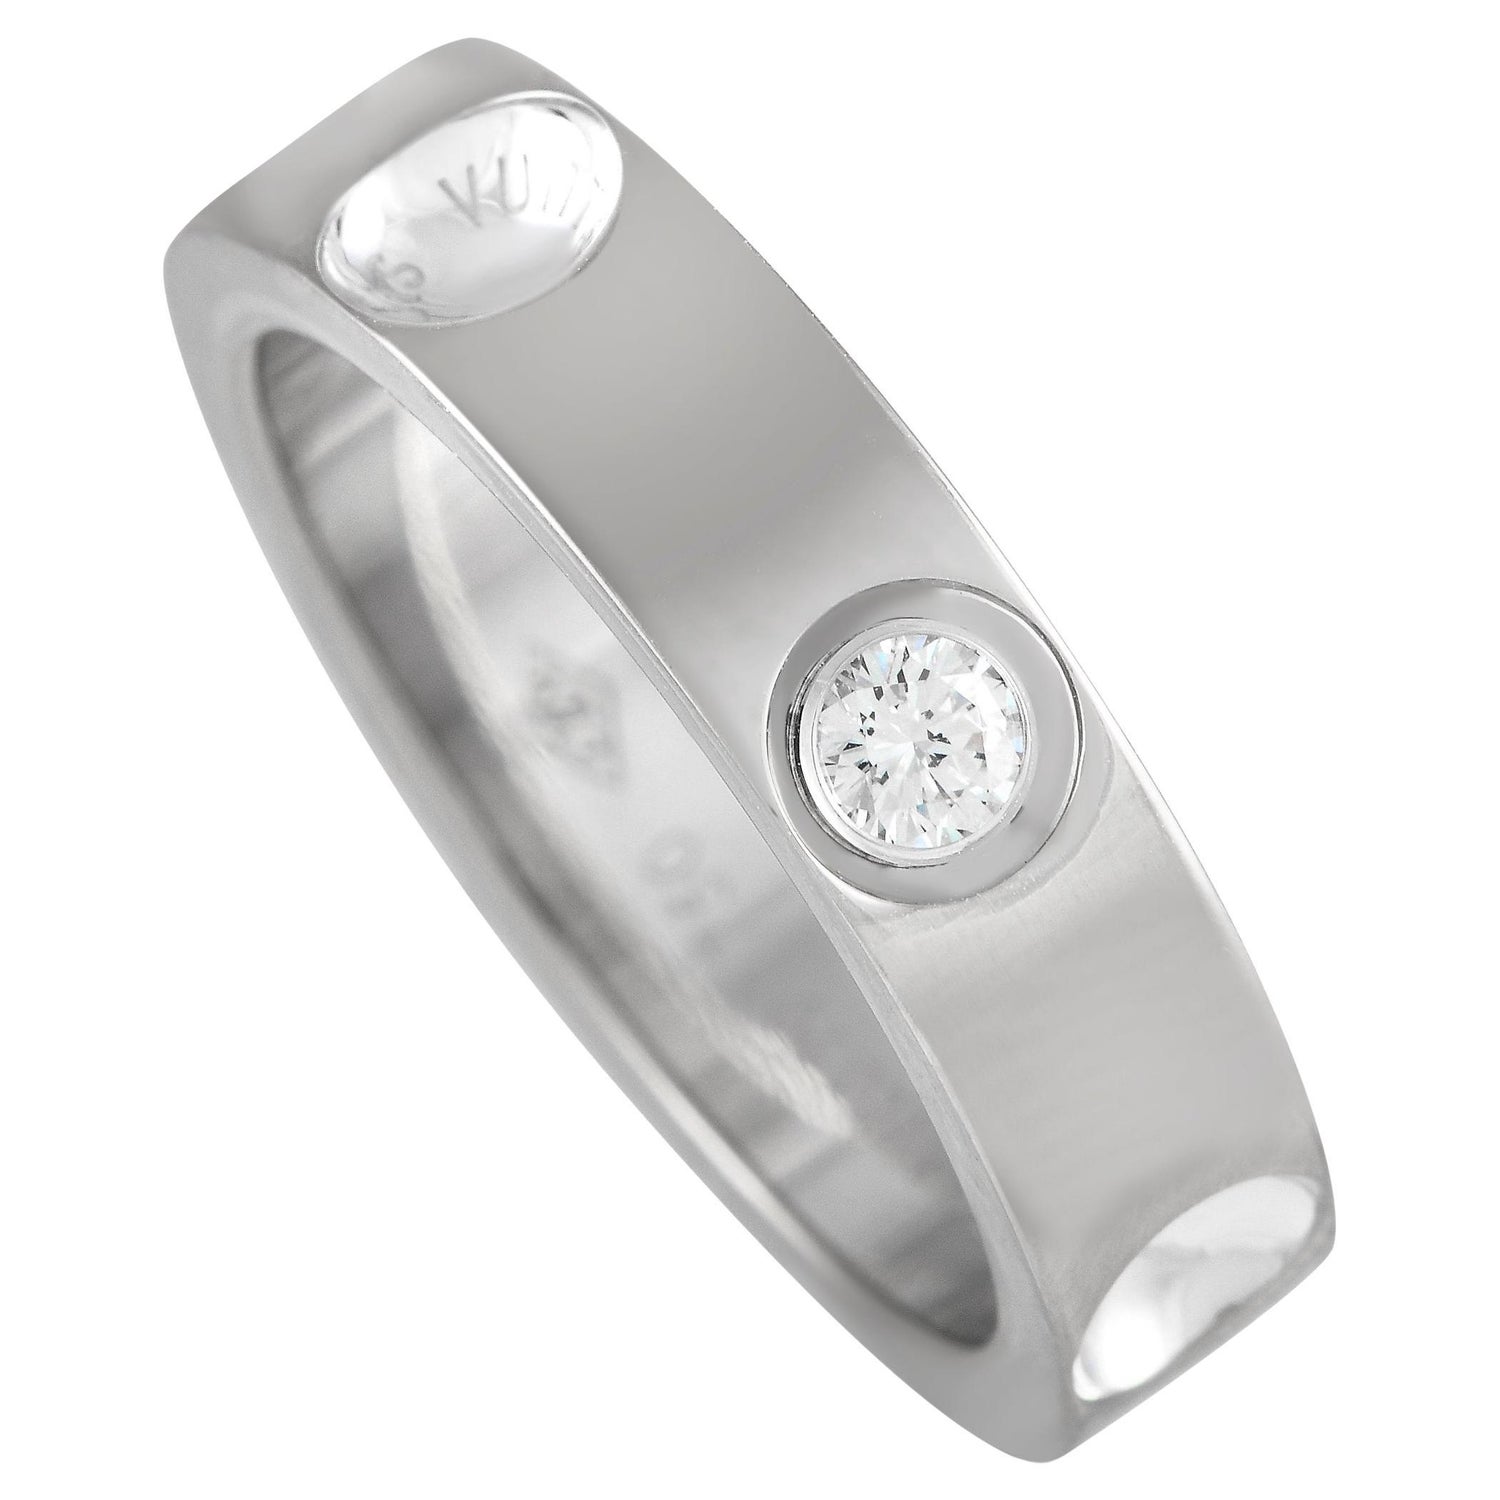 Louis Vuitton LV Volt One Band Ring, White Gold and Diamond Grey. Size 53